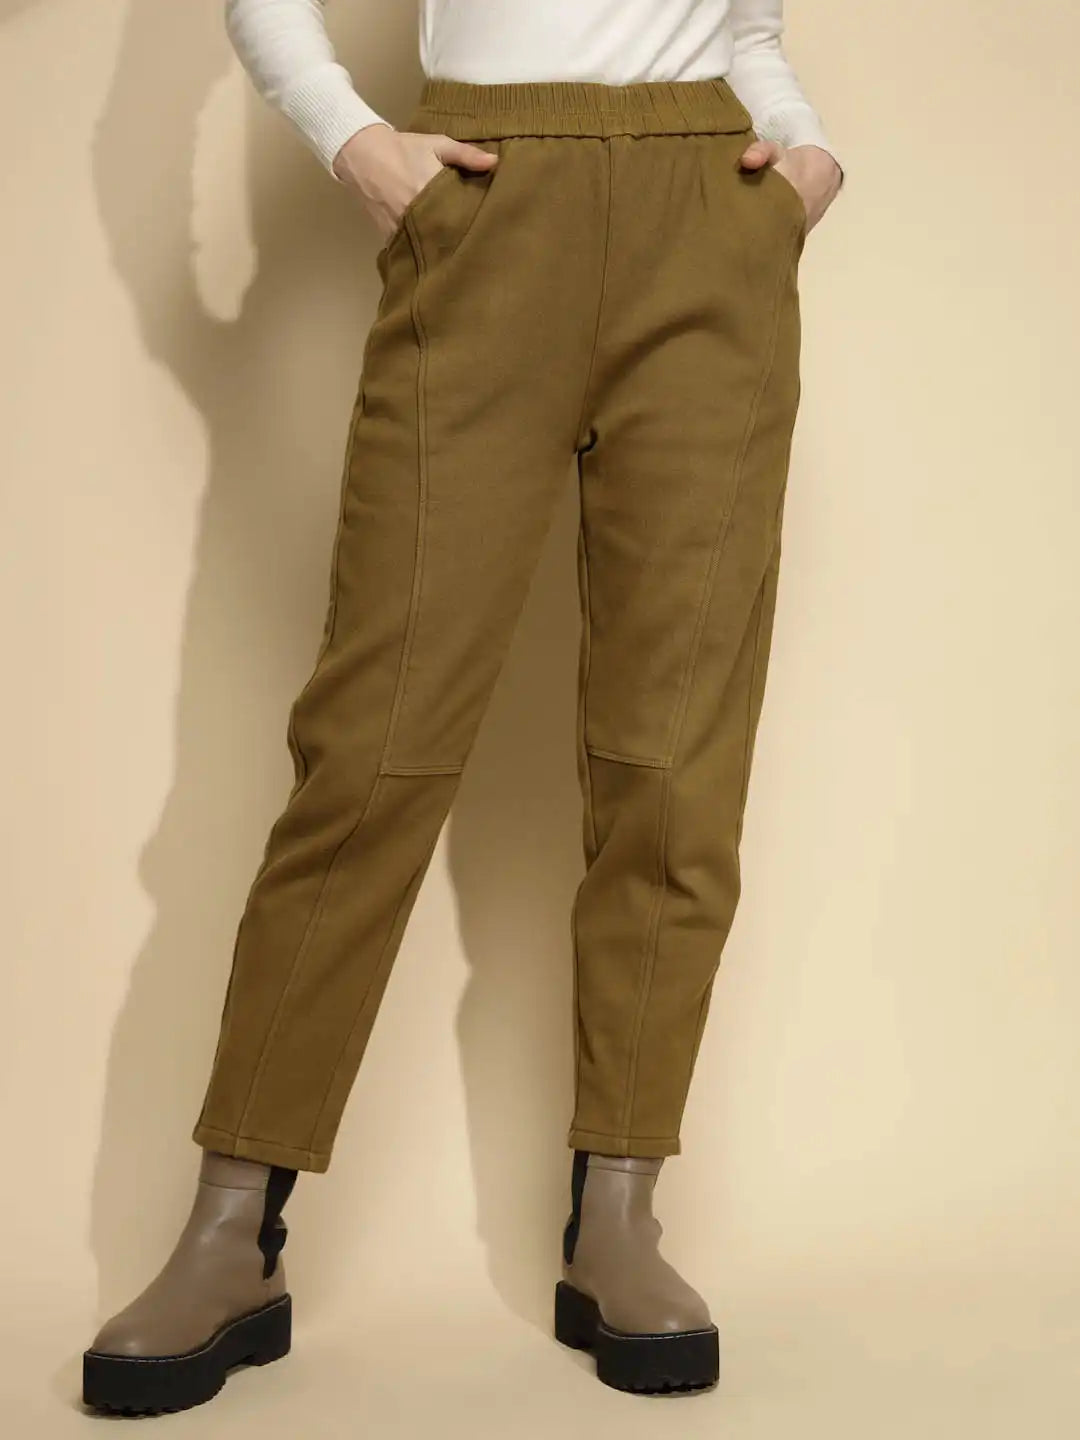 Solid Brown Solid Cotton Mid Rise Ankle Length Trouser